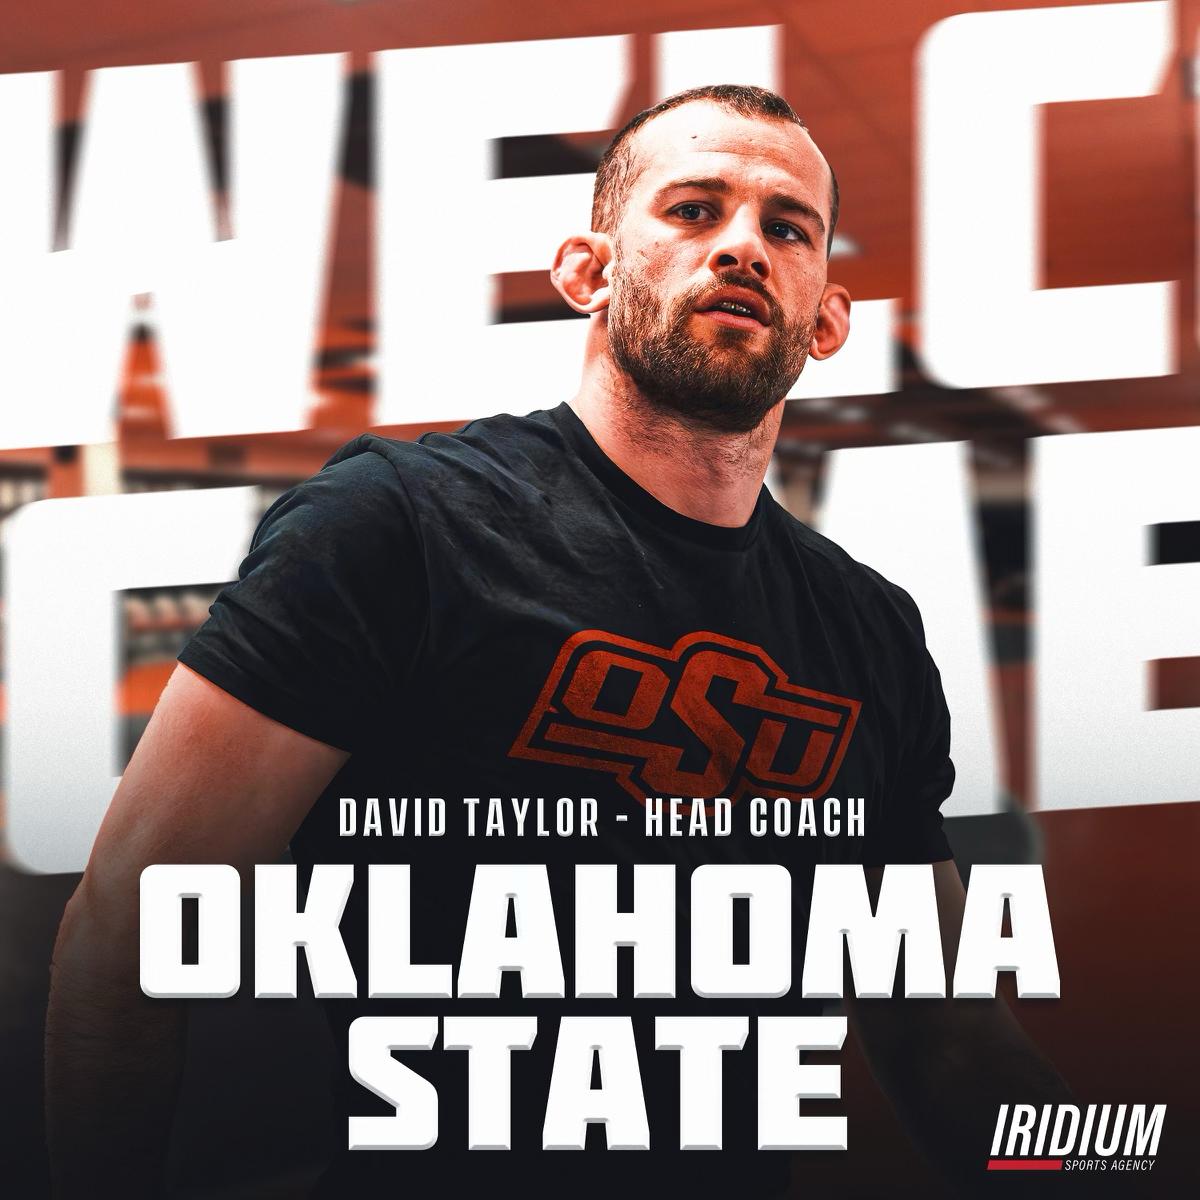 🚨 We're extremely proud to announce that #TeamIridium legend @magicman_psu is the new Head Coach at @CowboyWrestling 🙏🏼 David is one of the best 🇺🇸 wrestlers of all time and an incredible coach and leader. We know he will do amazing things at his new position 🙏🏼 #TheDarkside